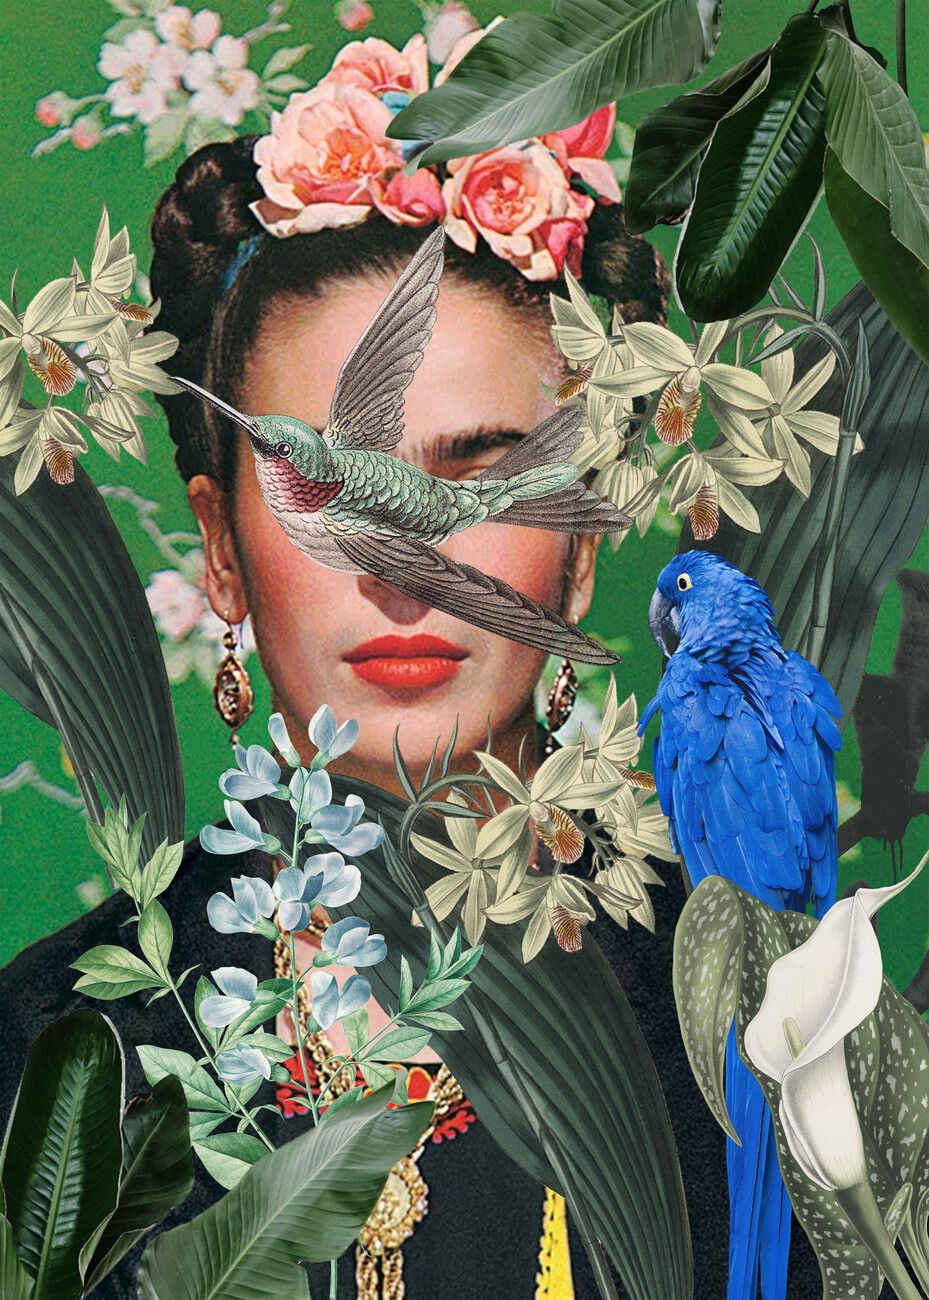 A digital collage of Frida Kahlo with tropical plants, flowers, and birds surrounding her. - Frida Kahlo